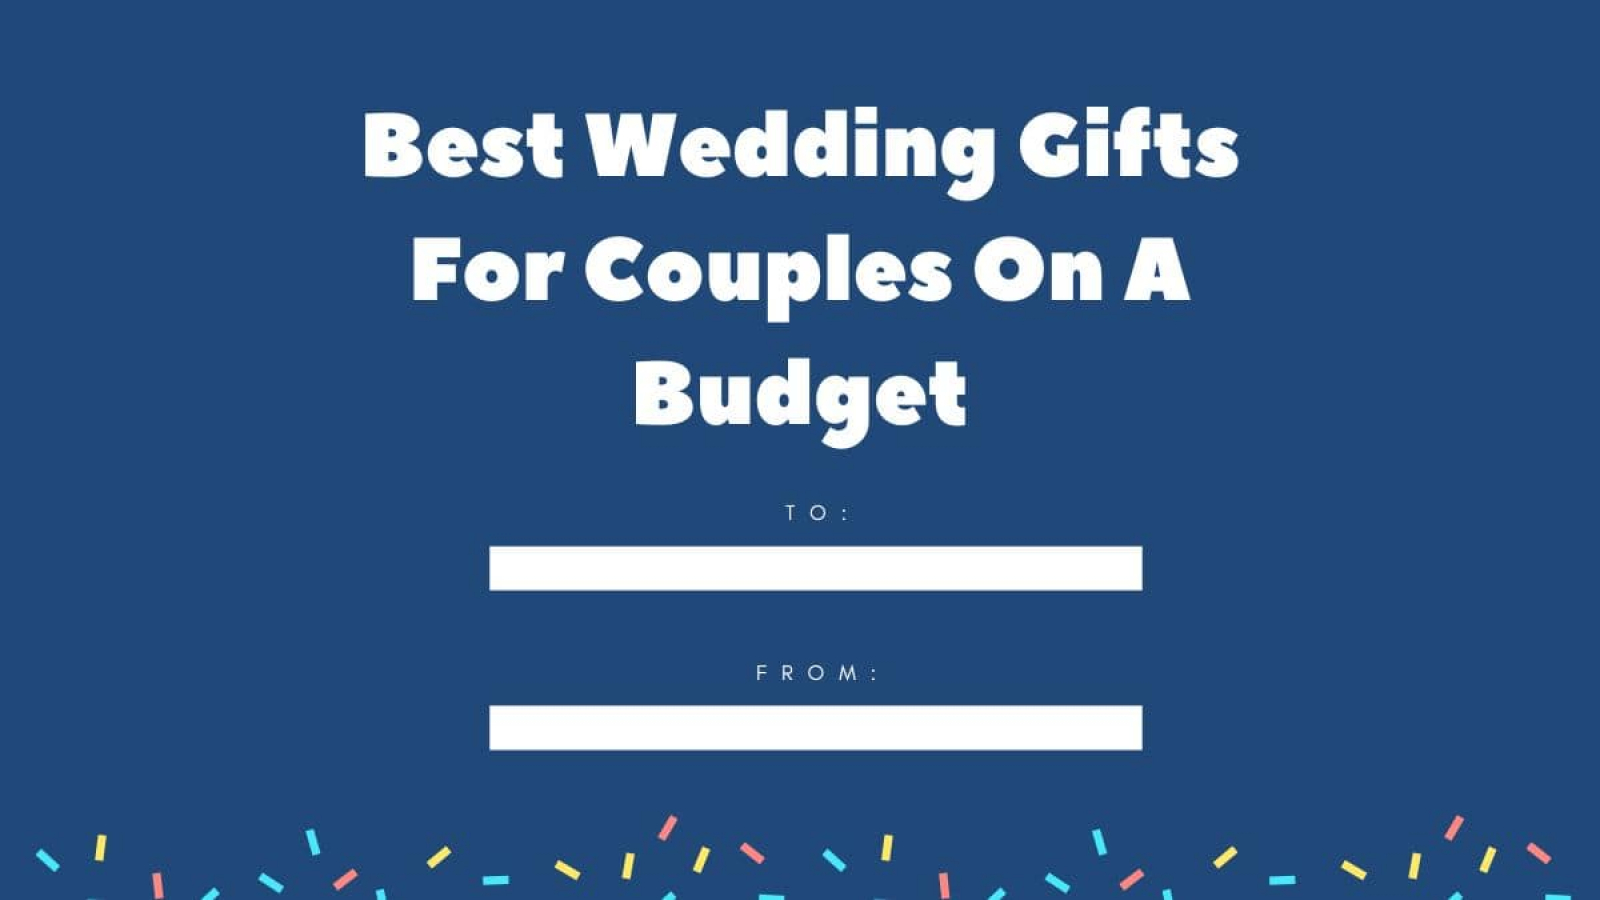 Best Wedding Gifts For Couples On A Budget